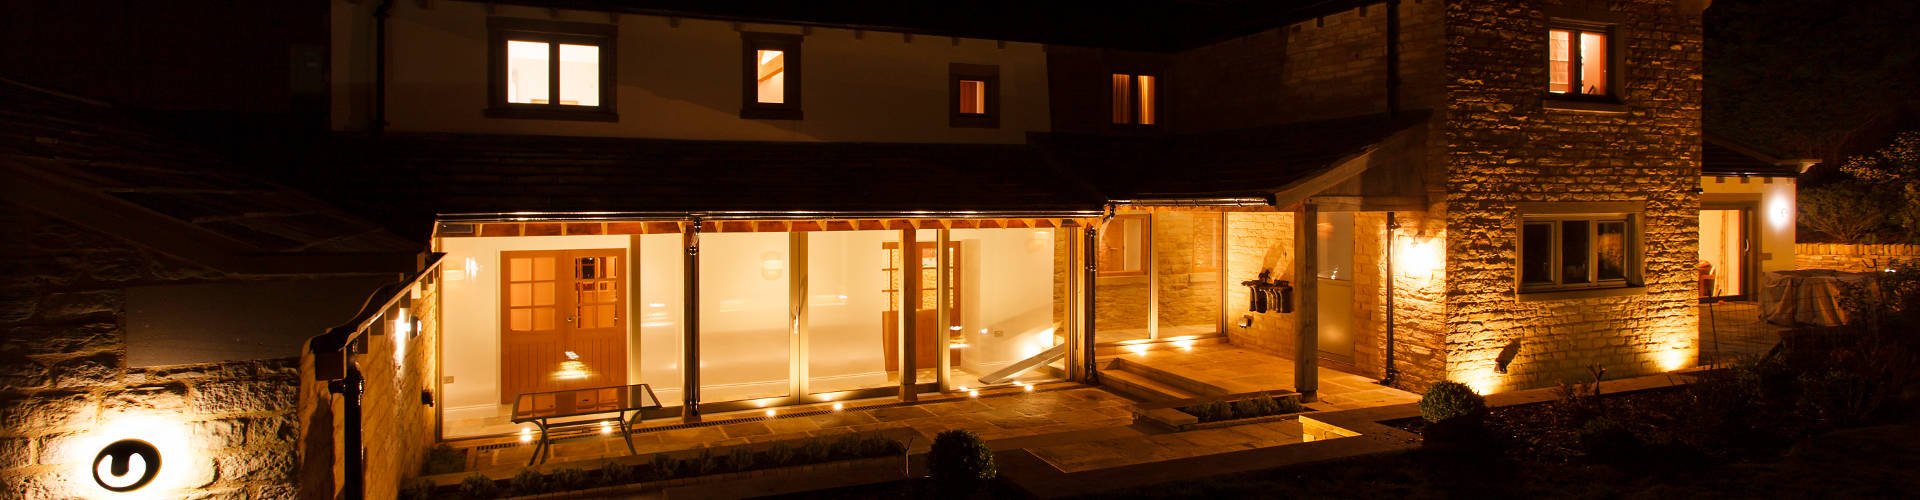 Title Image: A warmly-lit glass hallway linking two ends of a converted Yorkshire farmhouse.